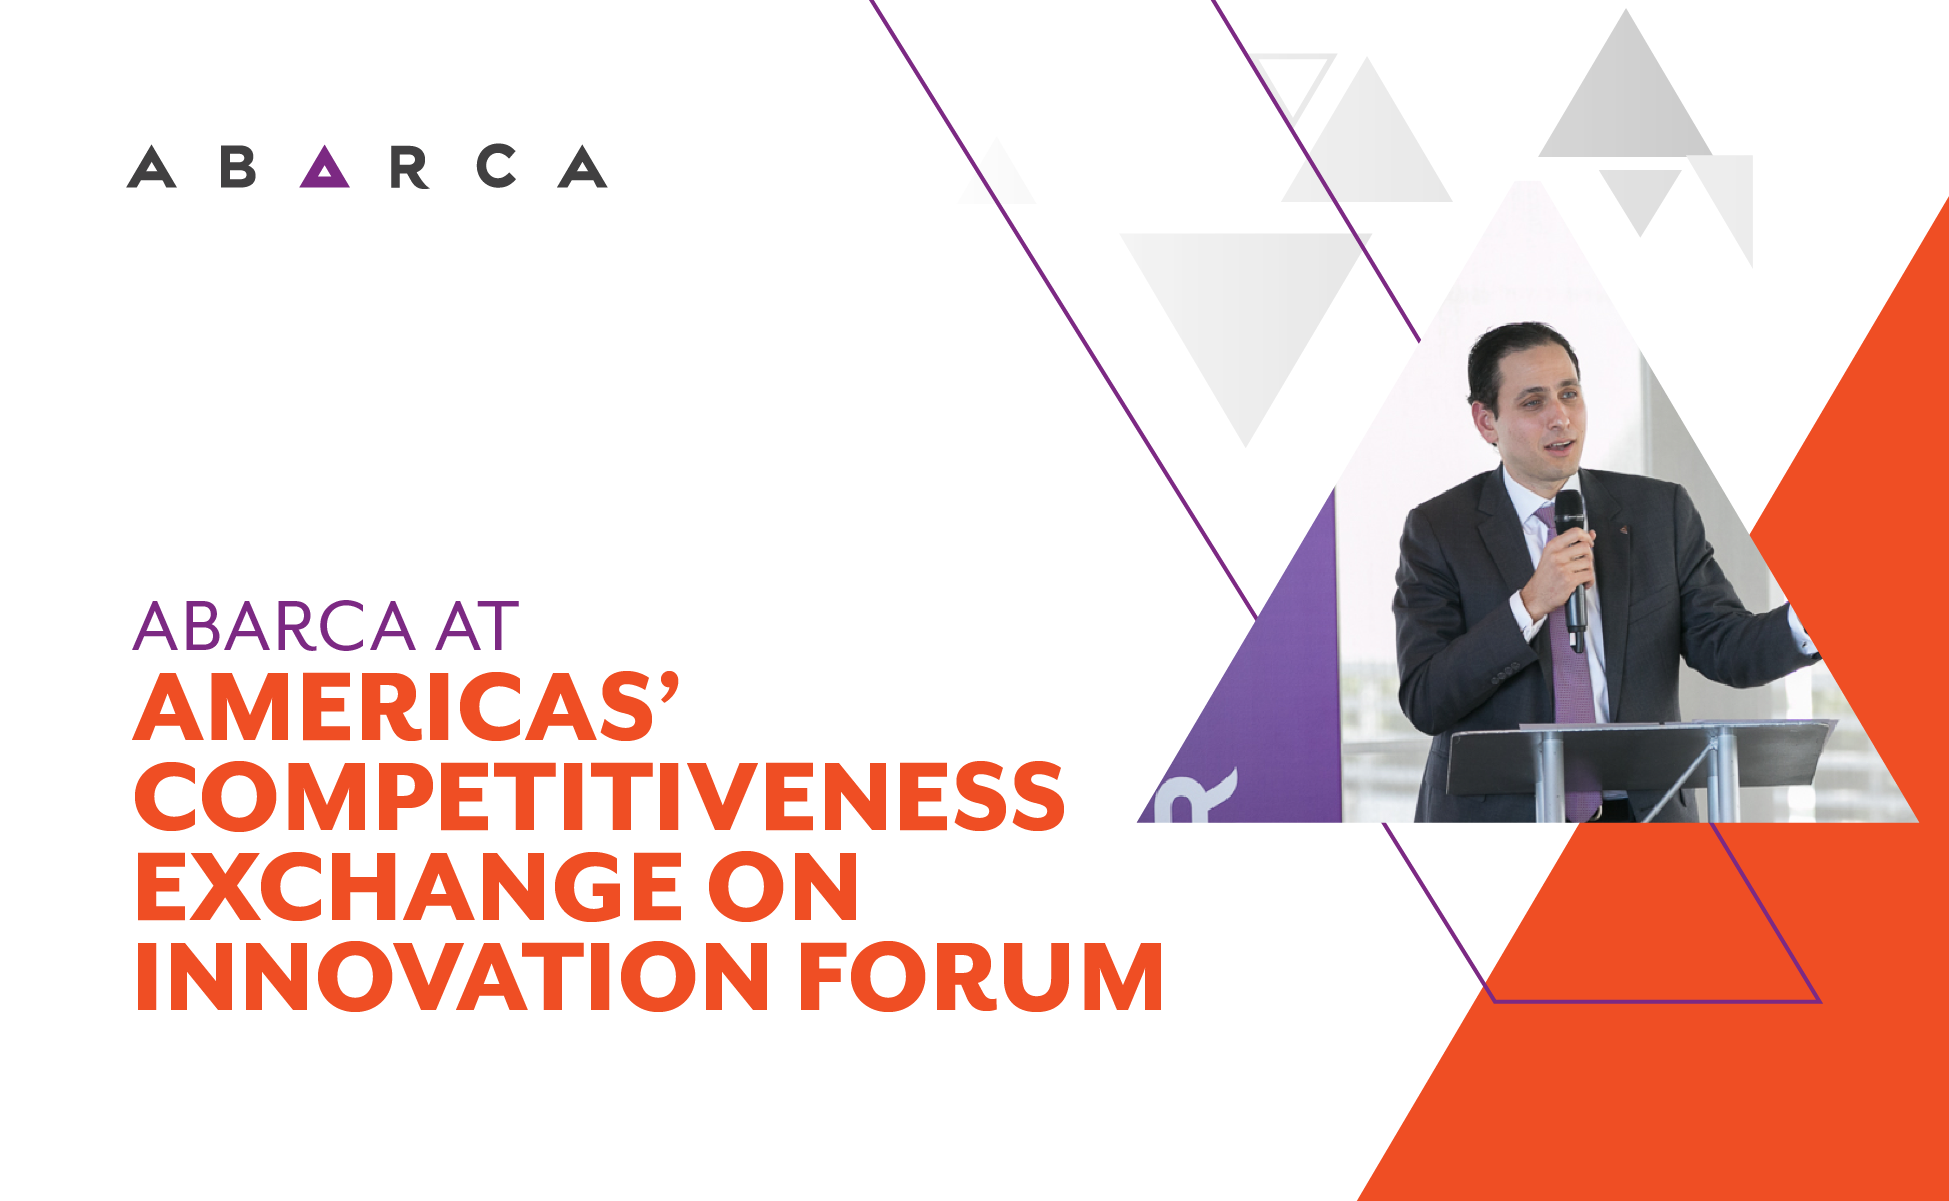 Abarca selected to present at Americas’ Competitiveness Exchange on Innovation Forum